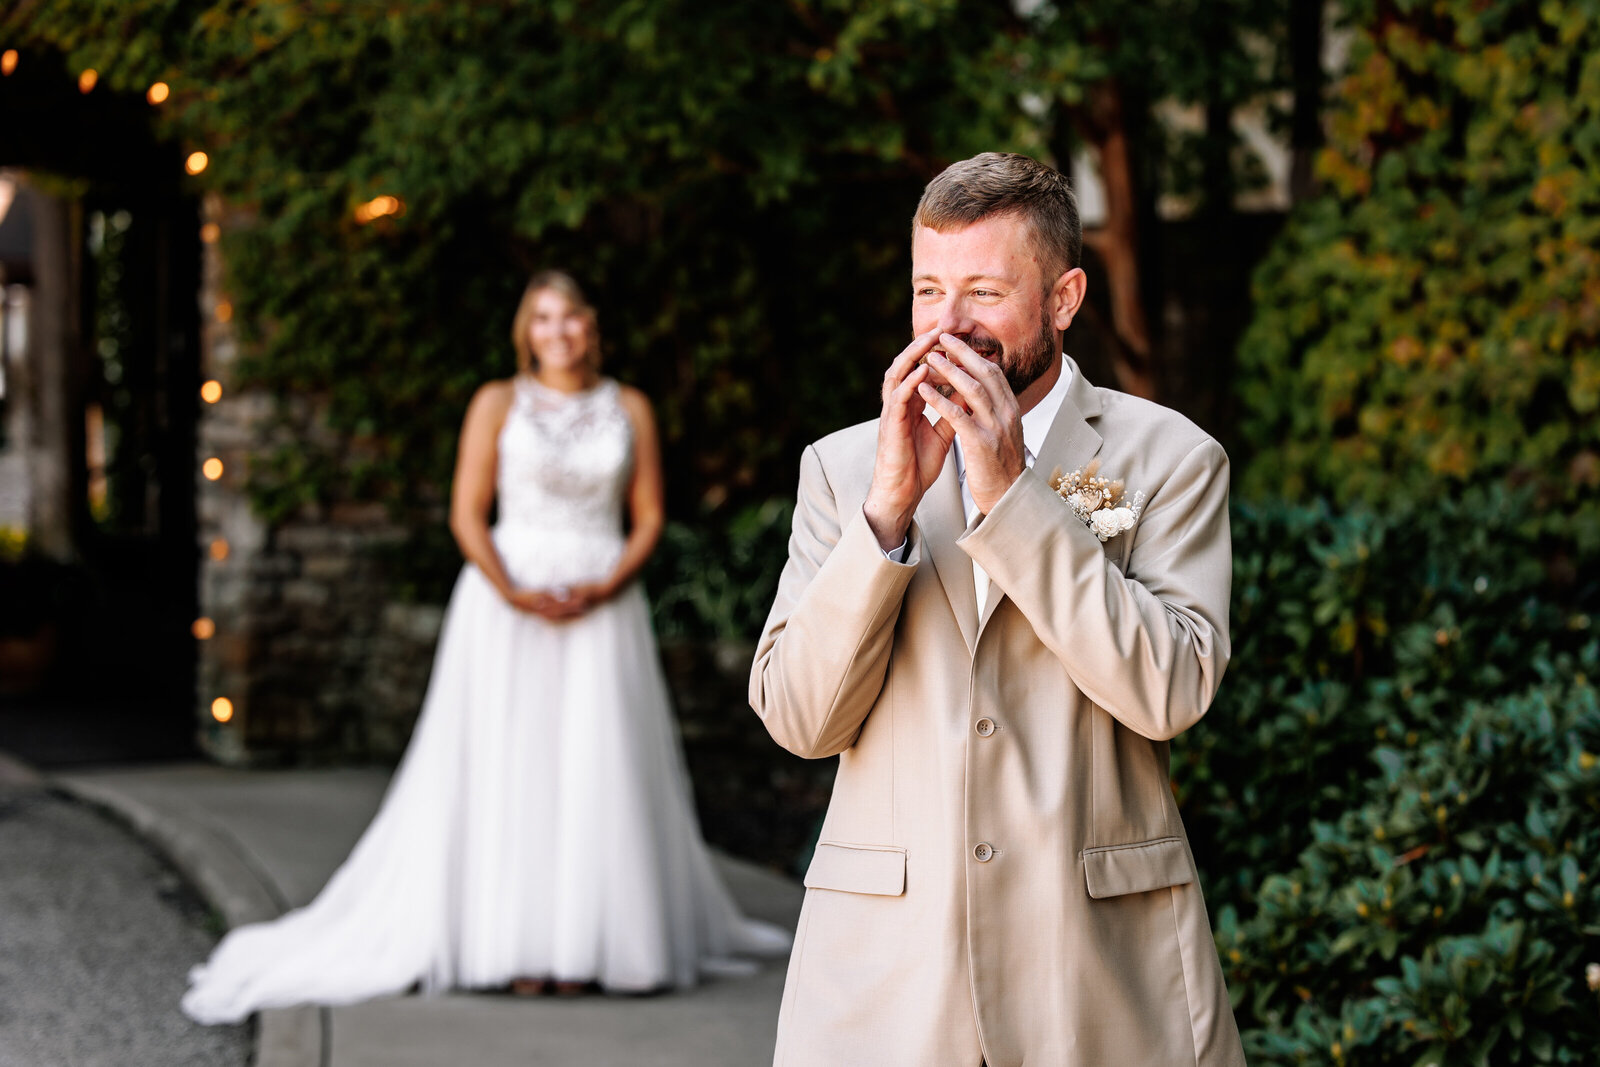 Groom waits in anticipation to see his bride